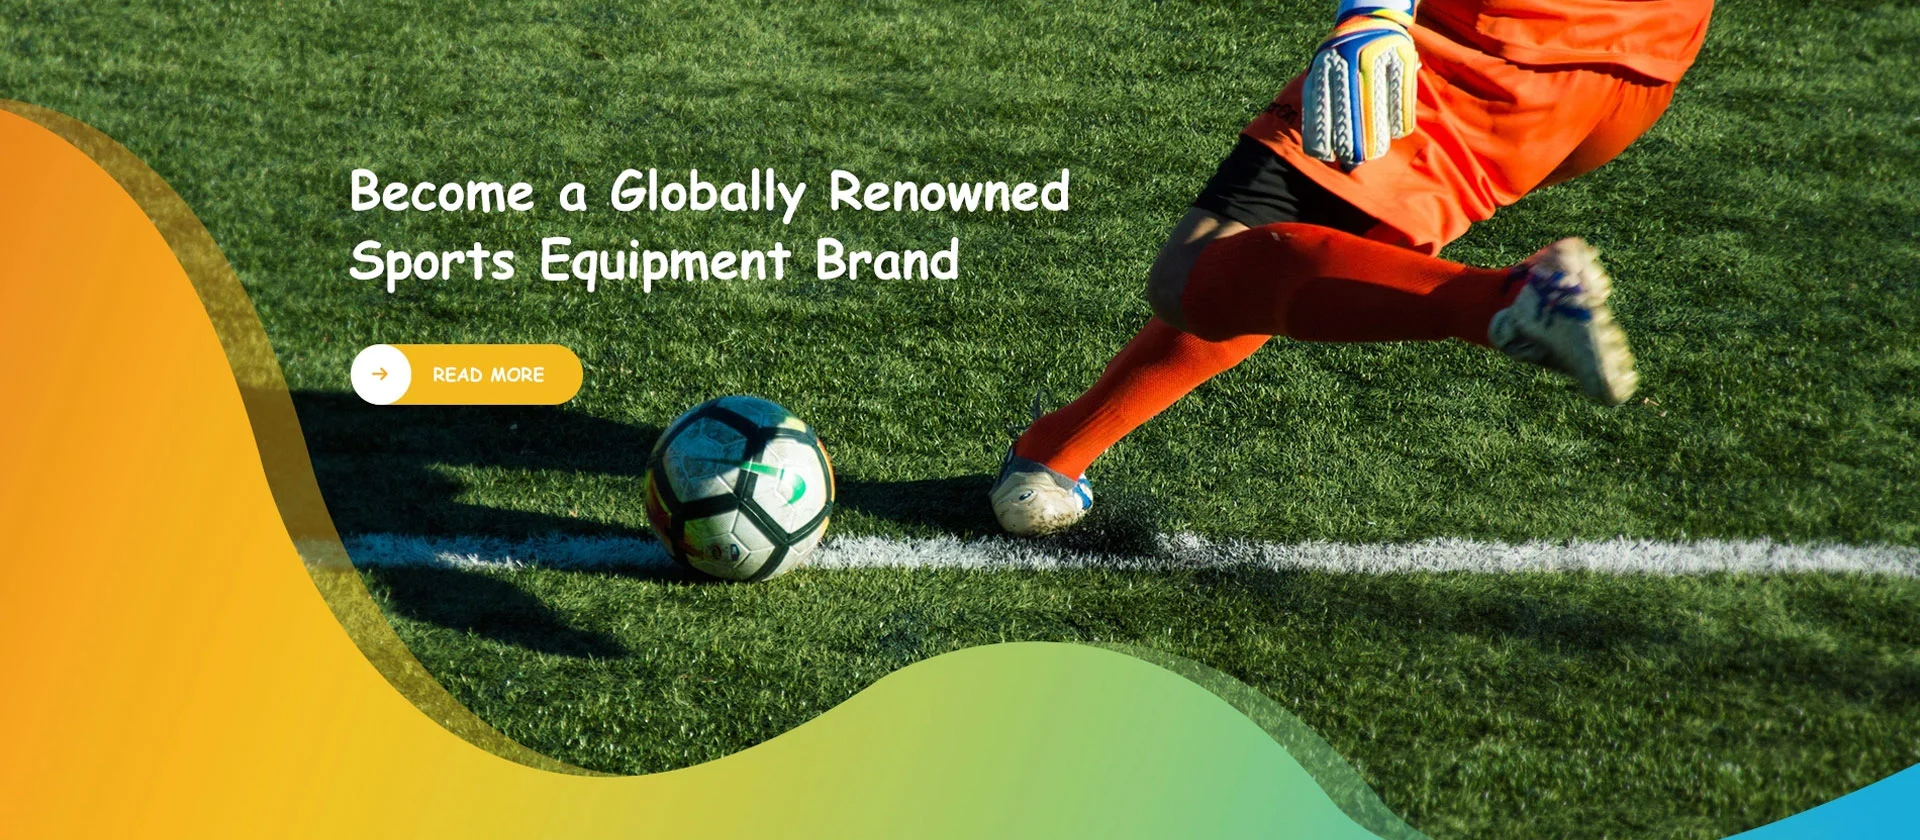 Become a Globally Renowned Sports Equipment Brand